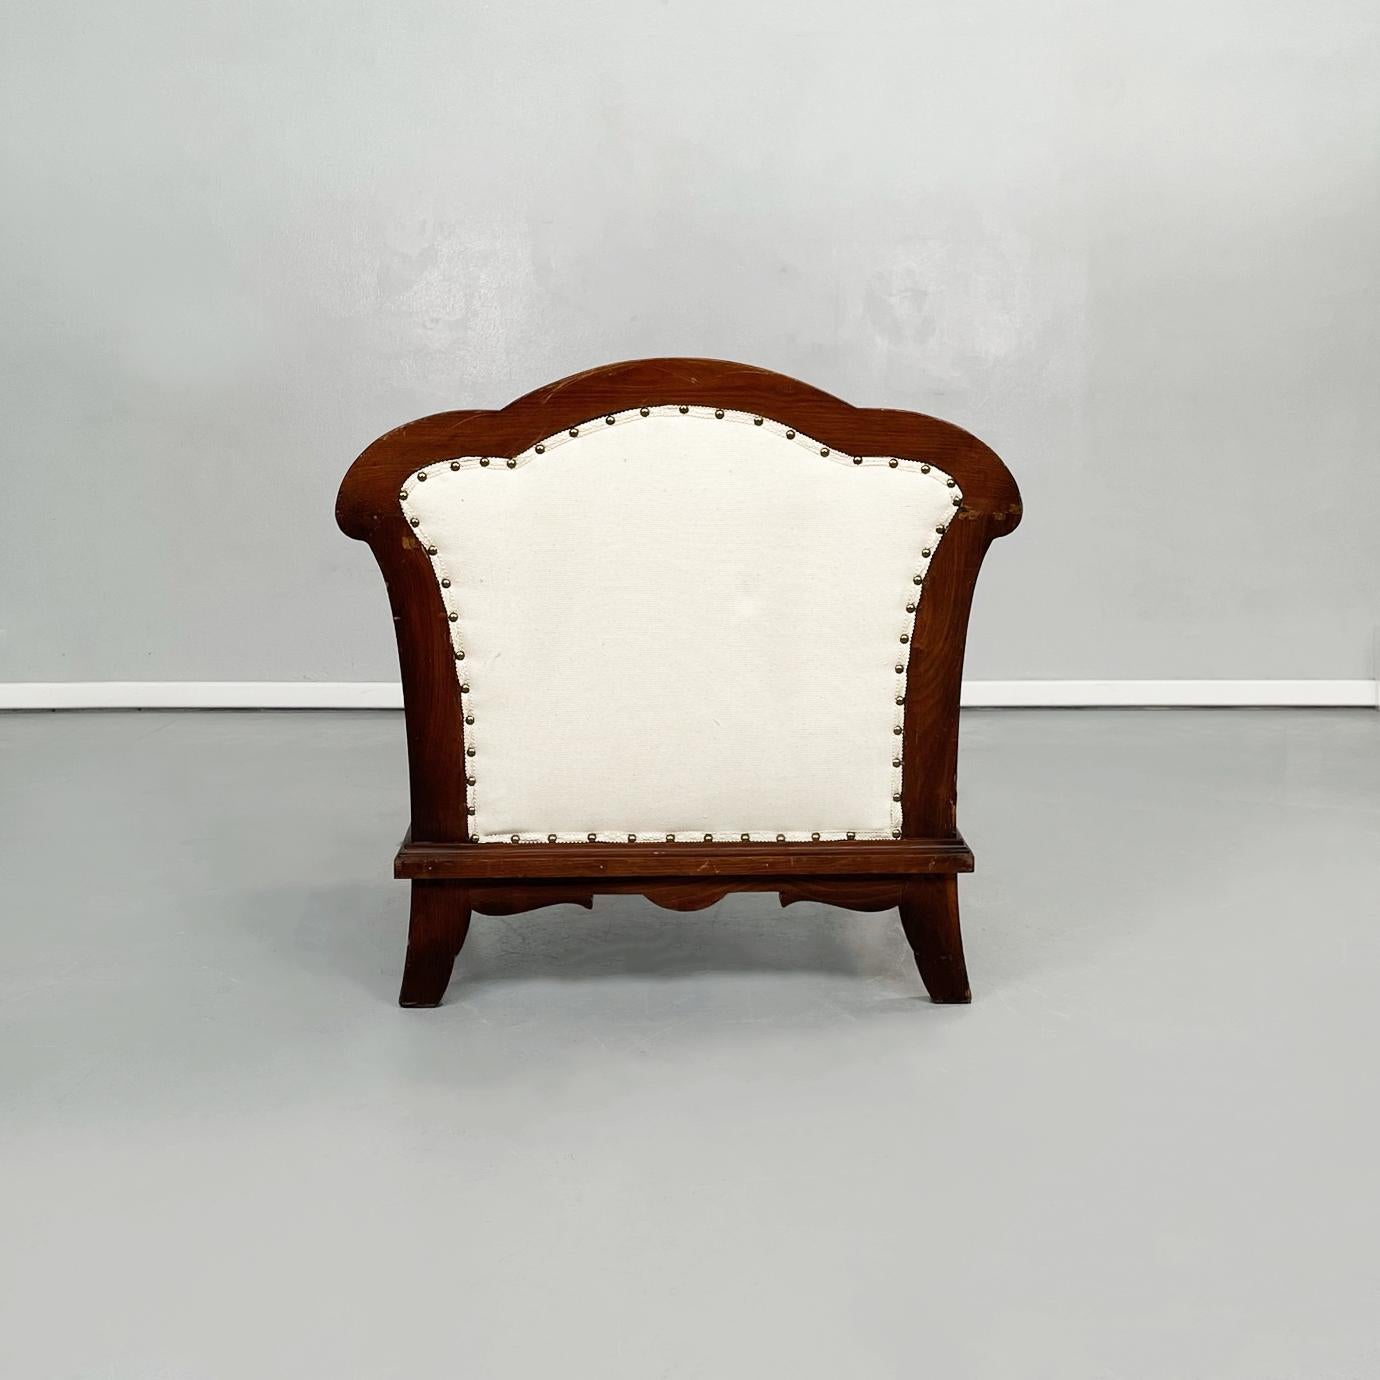 Italian Modern Wooden Armchairs with White Fabric, 1940s For Sale 1